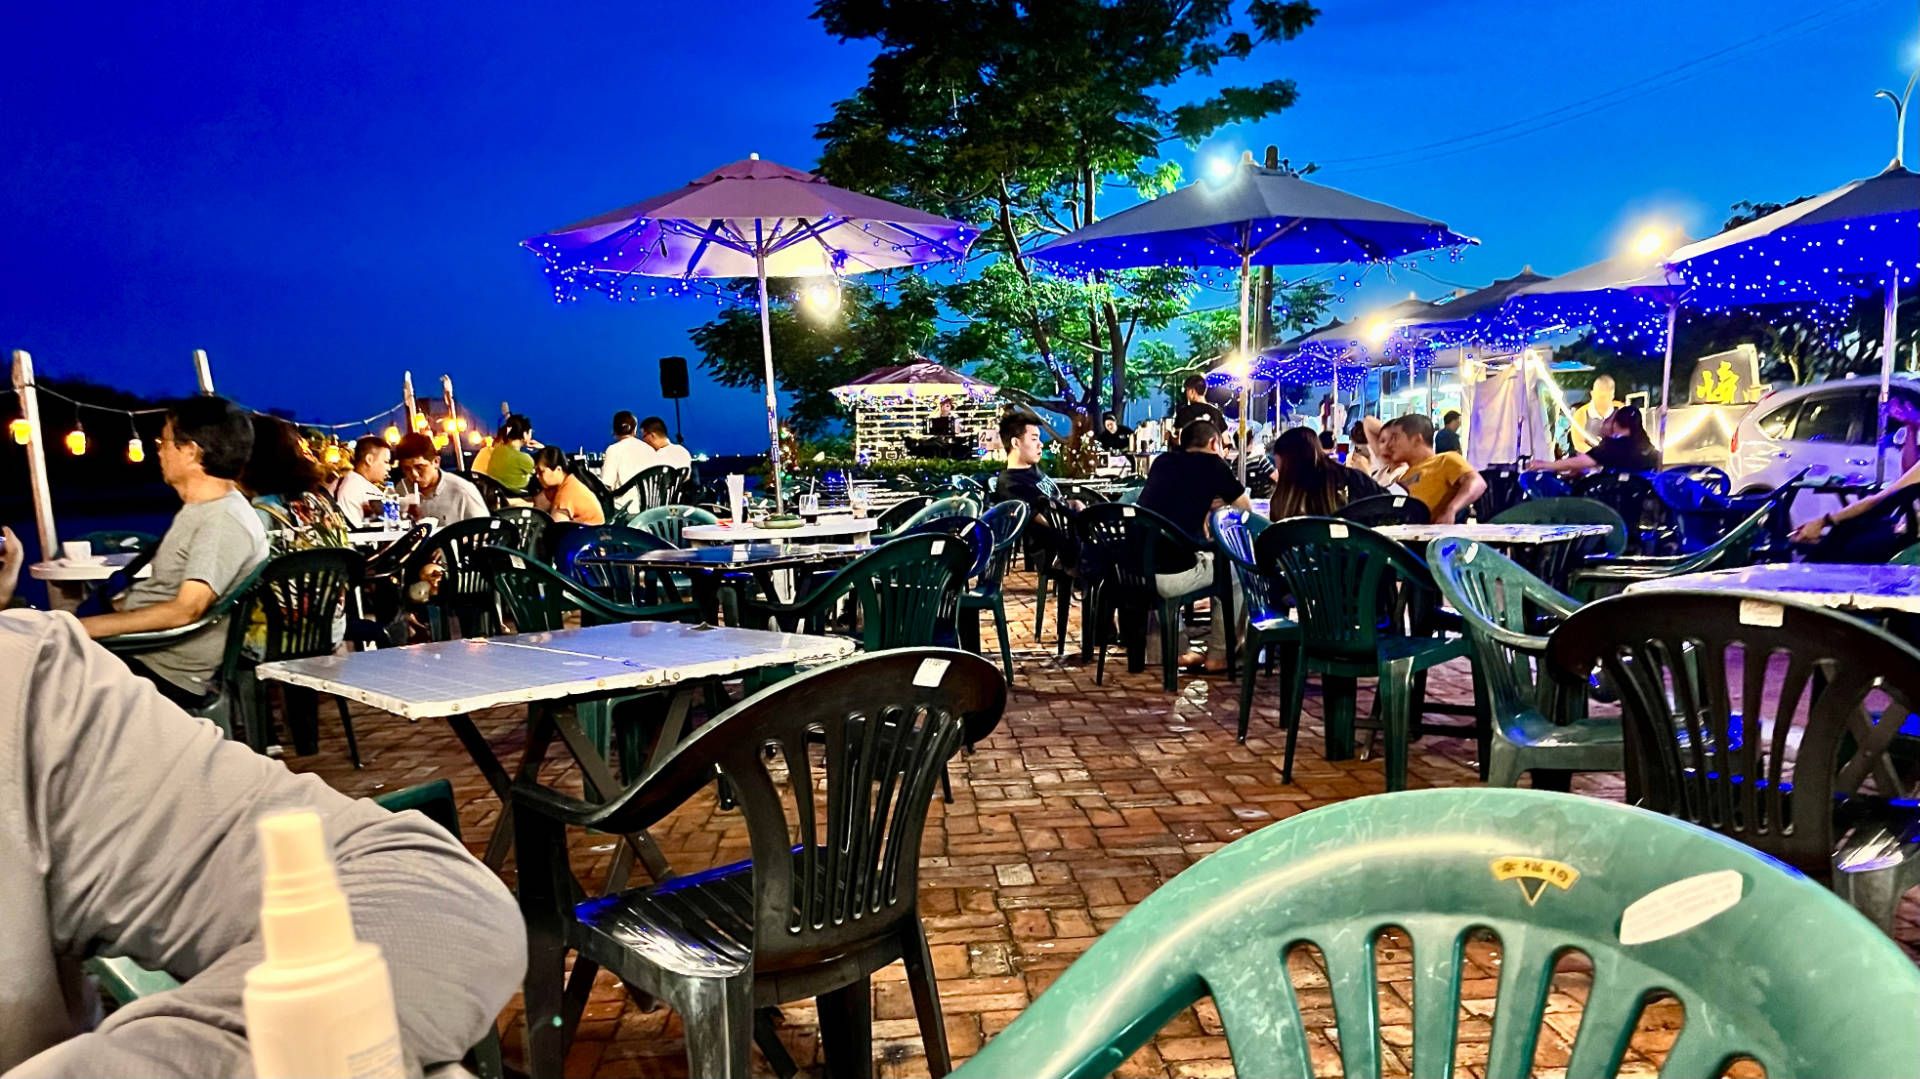 People sitting at outdoor tables, under umbrellas and festoon lights, at a cafe. A musician is singing on a stage in the distance.